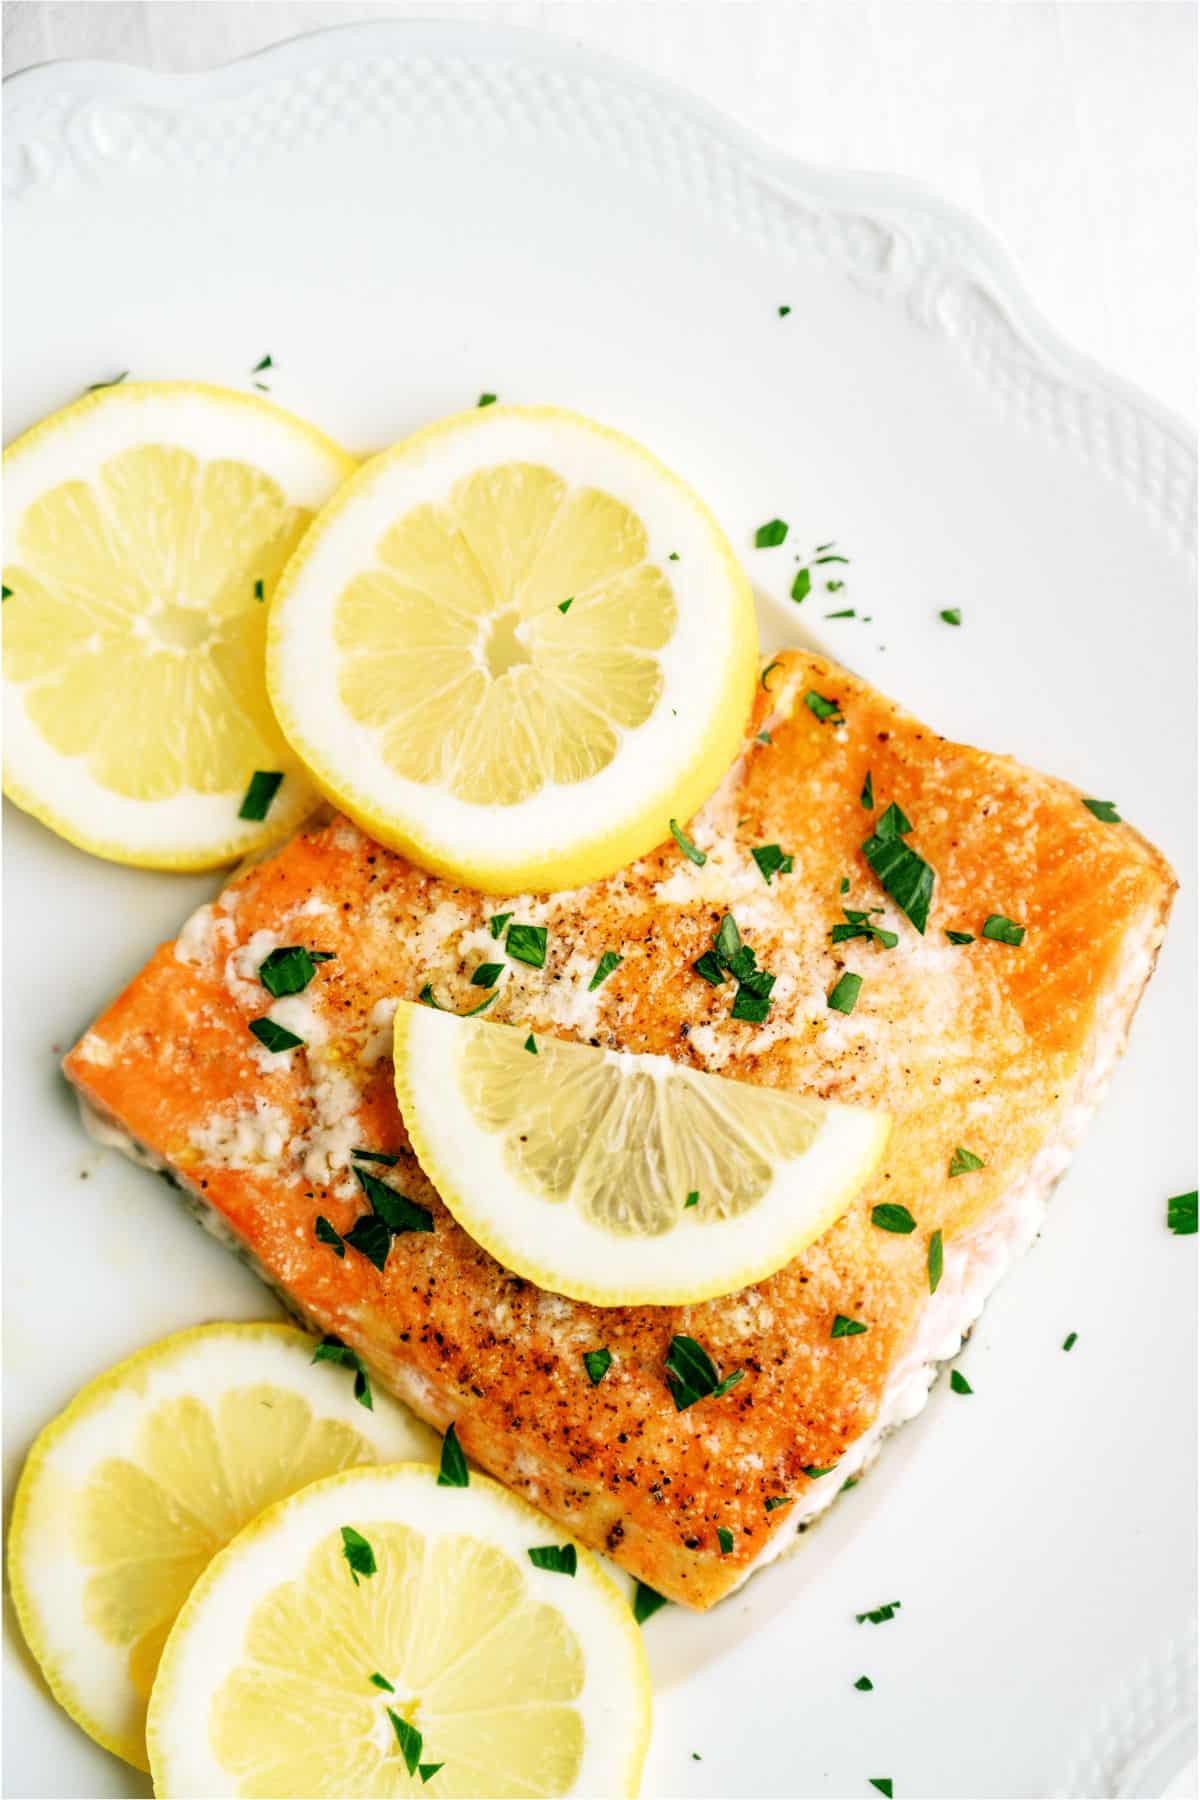 Top view of Baked Salmon on a plate topped with fresh lemon